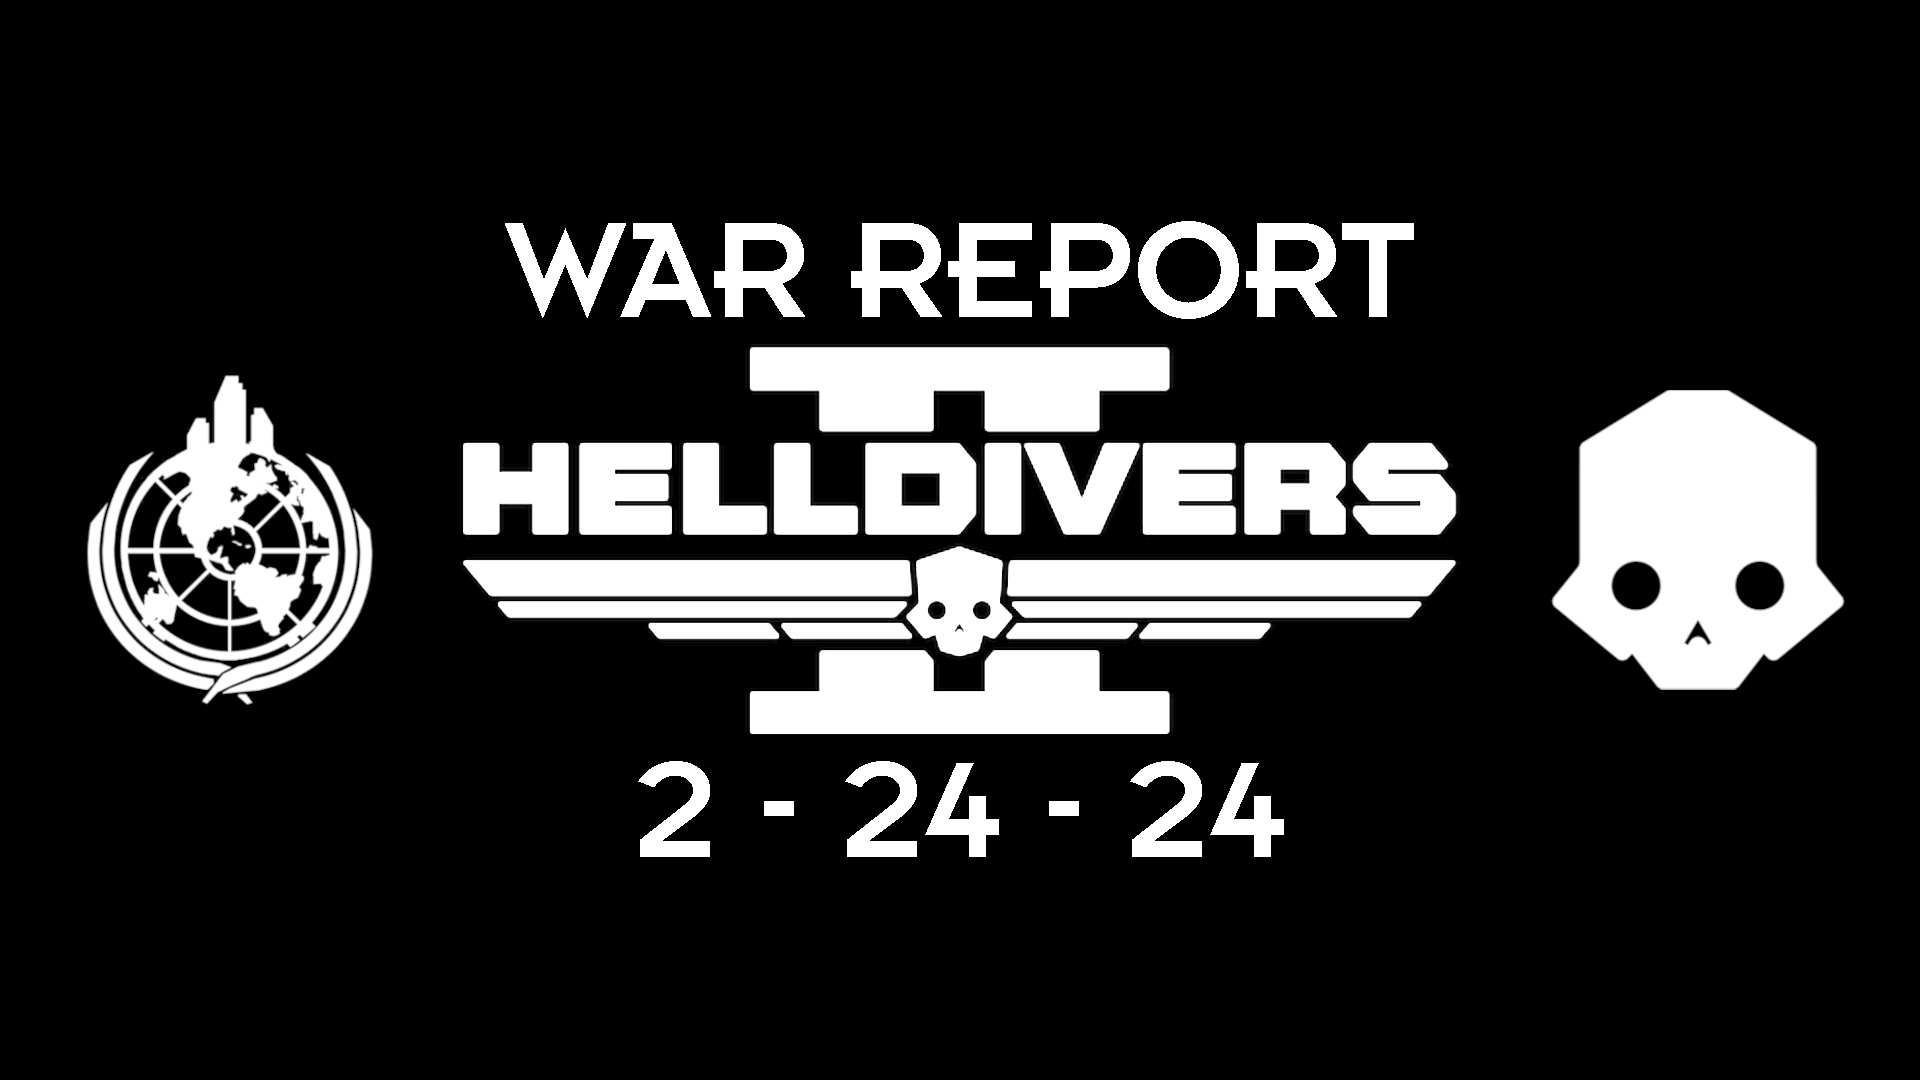 Welcome to Hell, Divers – Helldivers 2 Galactic War Report 2/24/24